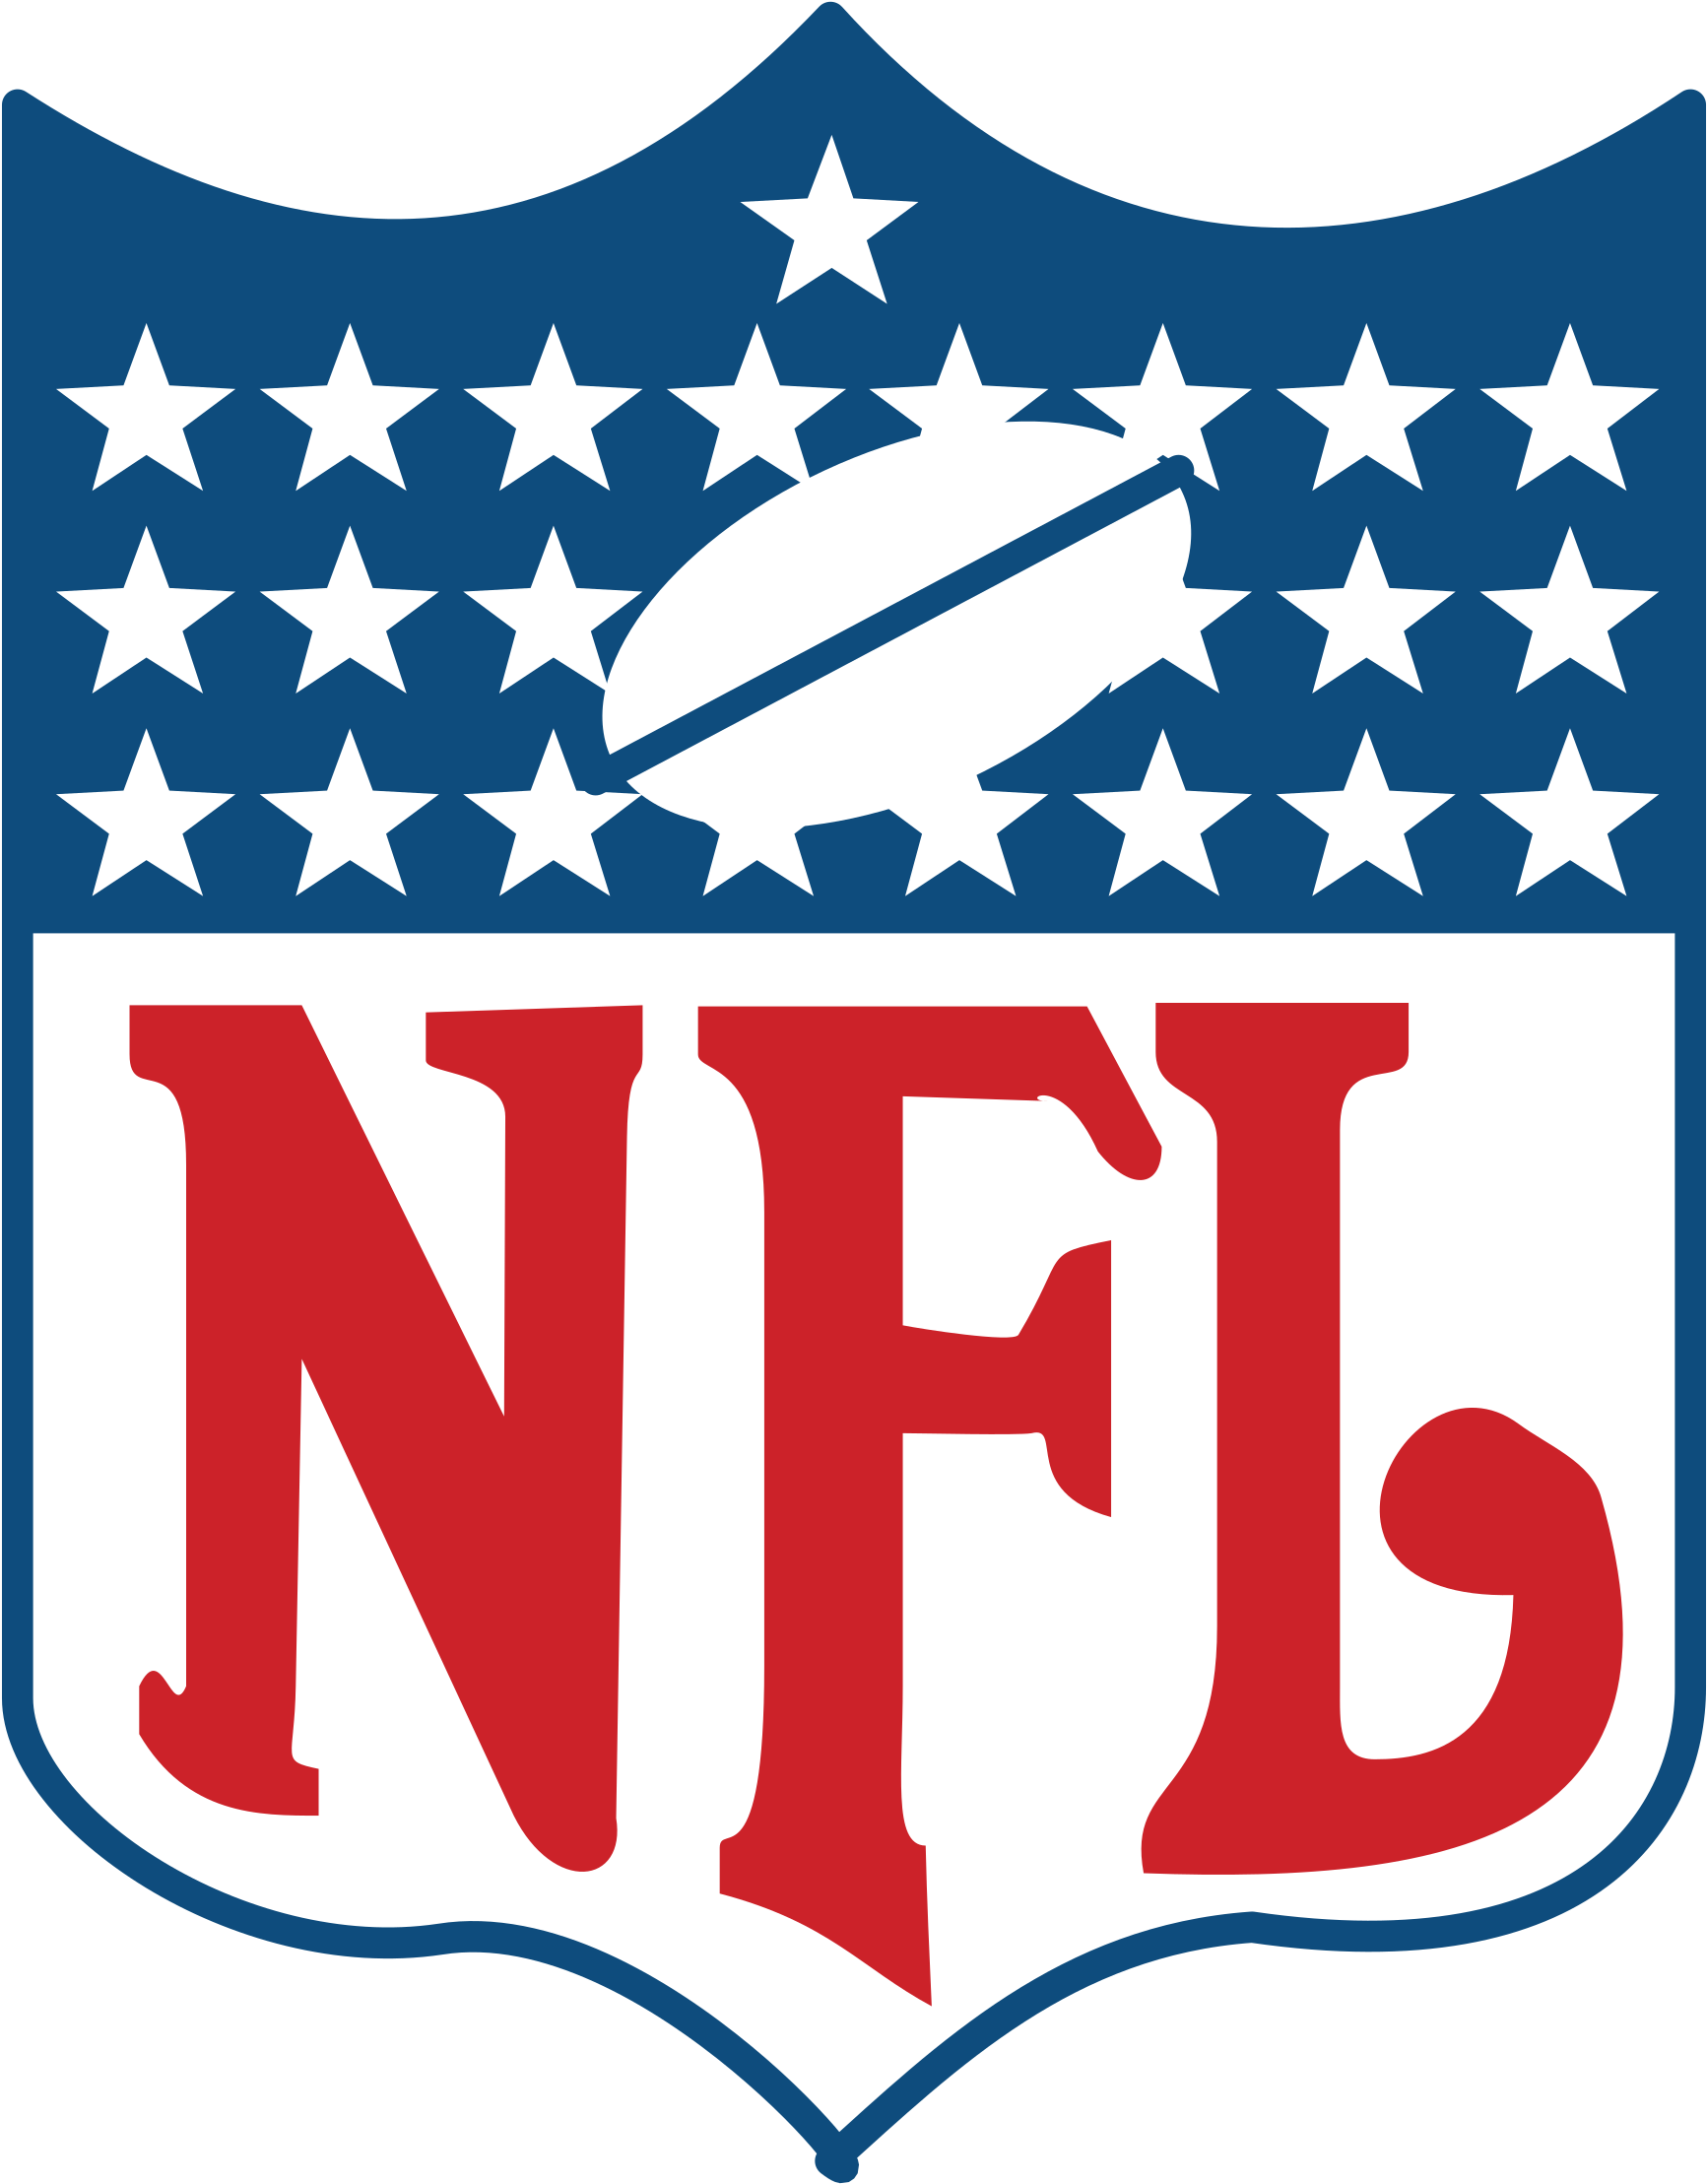 A Logo With Stars And A Football